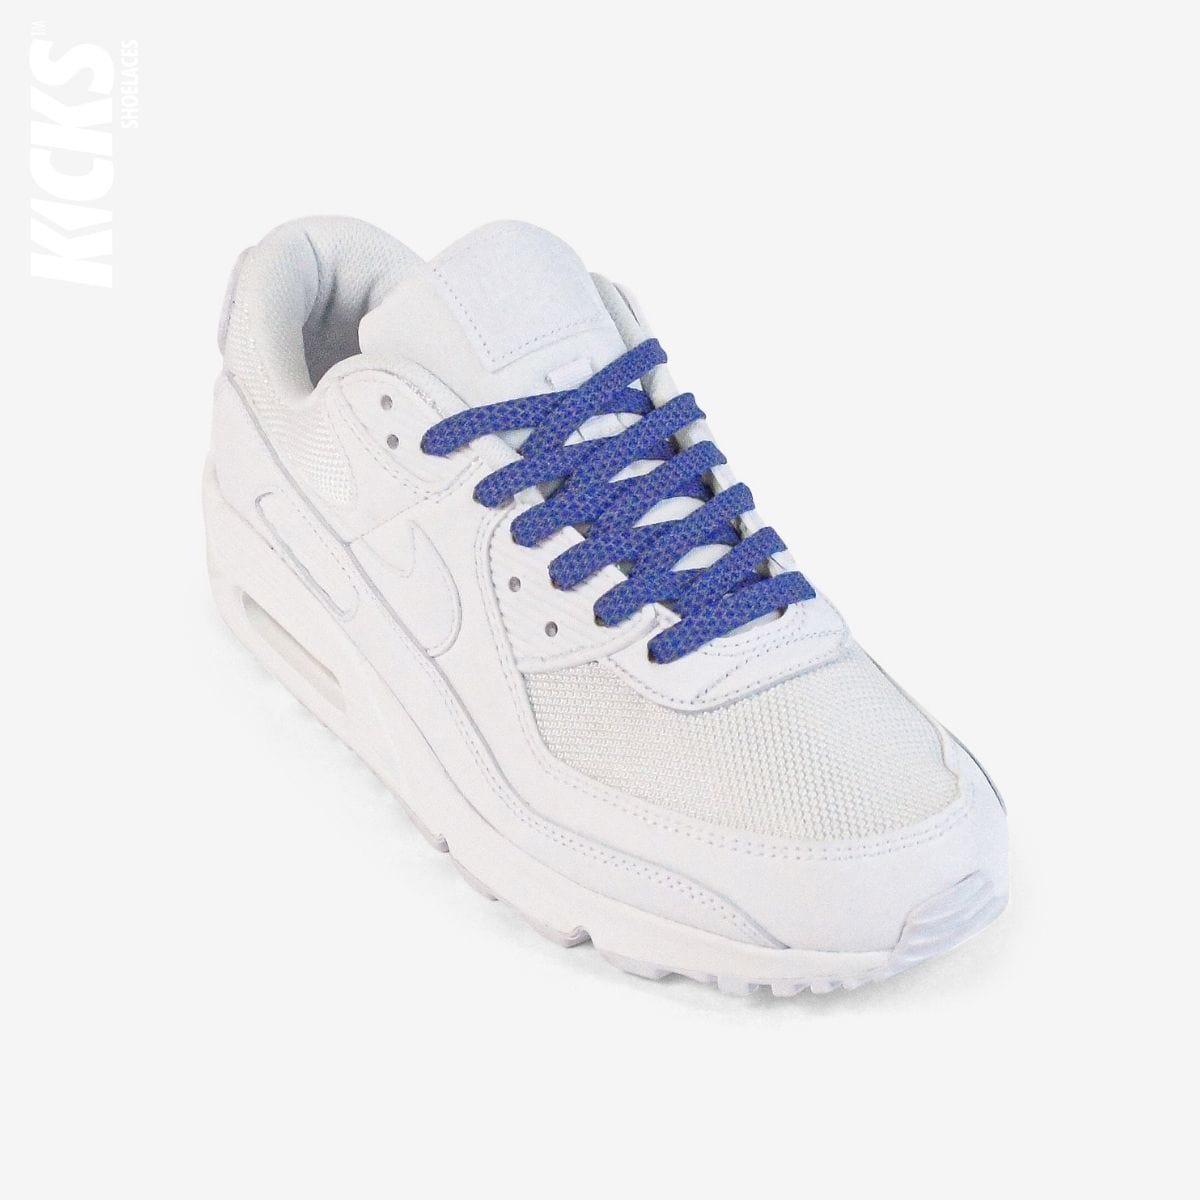 blue-reflective-colored-shoelaces-on-white-sneakers